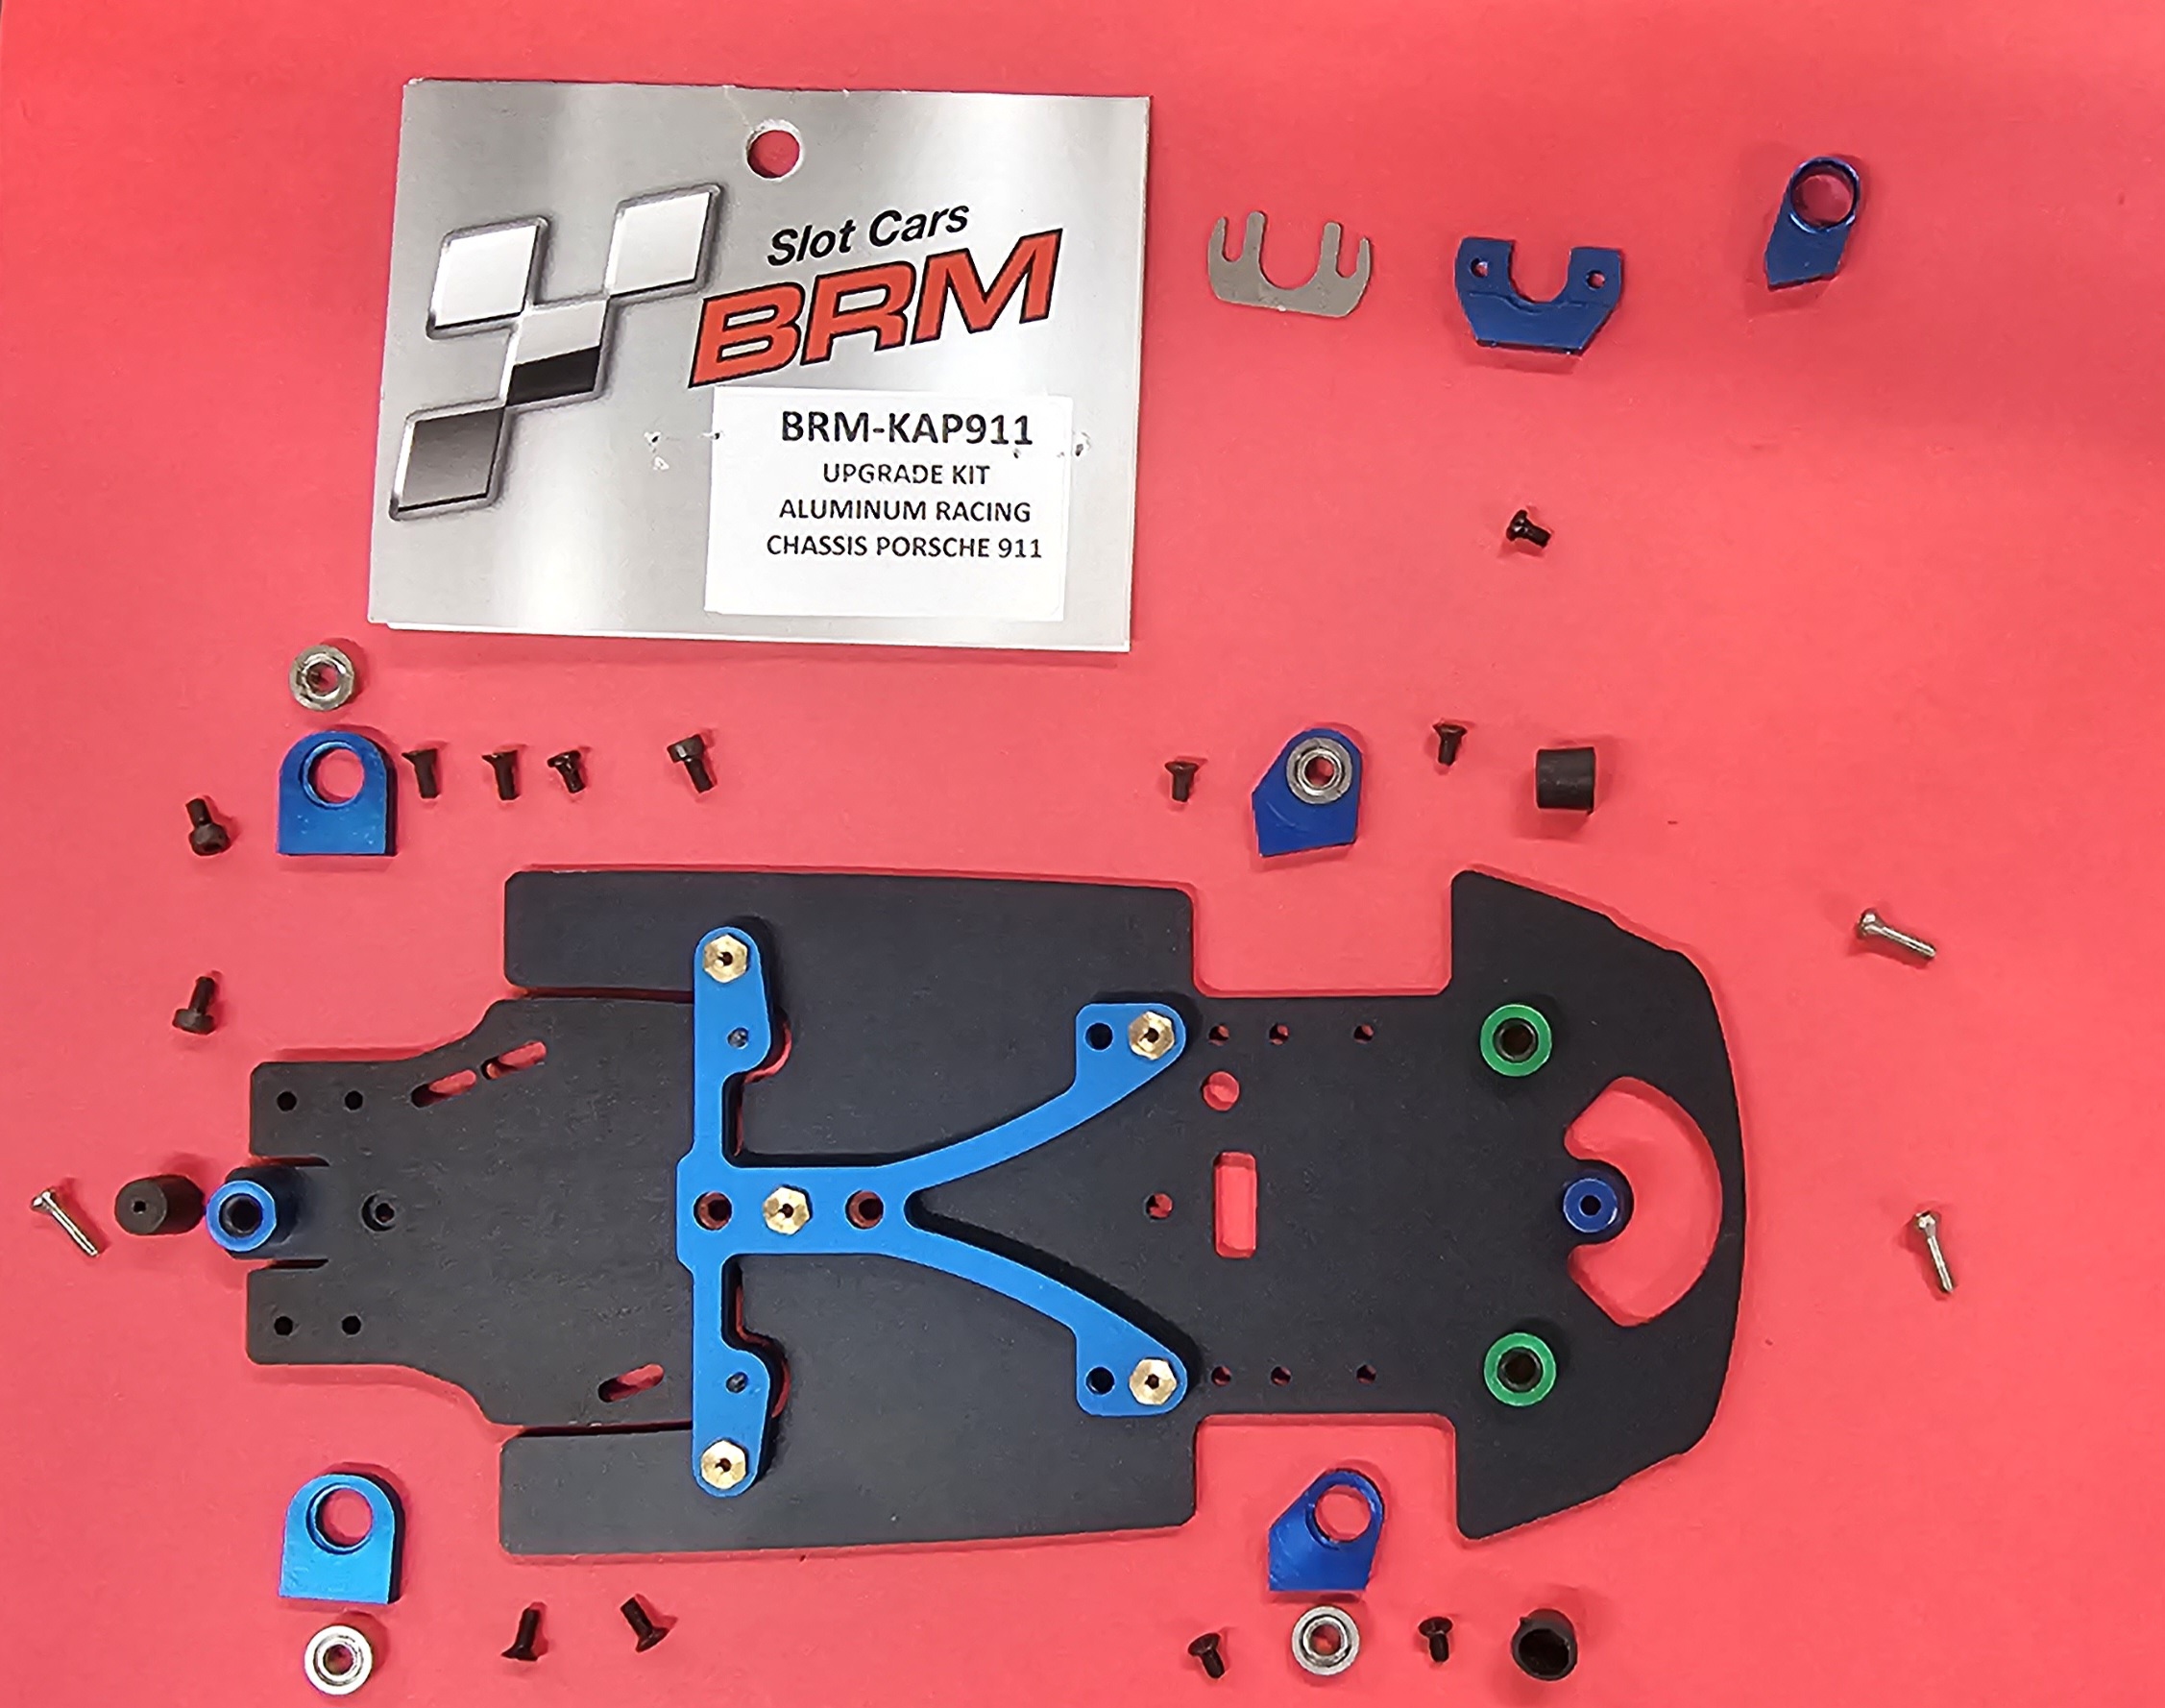 KA-P911 Upgrade kit to convert to the new Aluminum Chassis